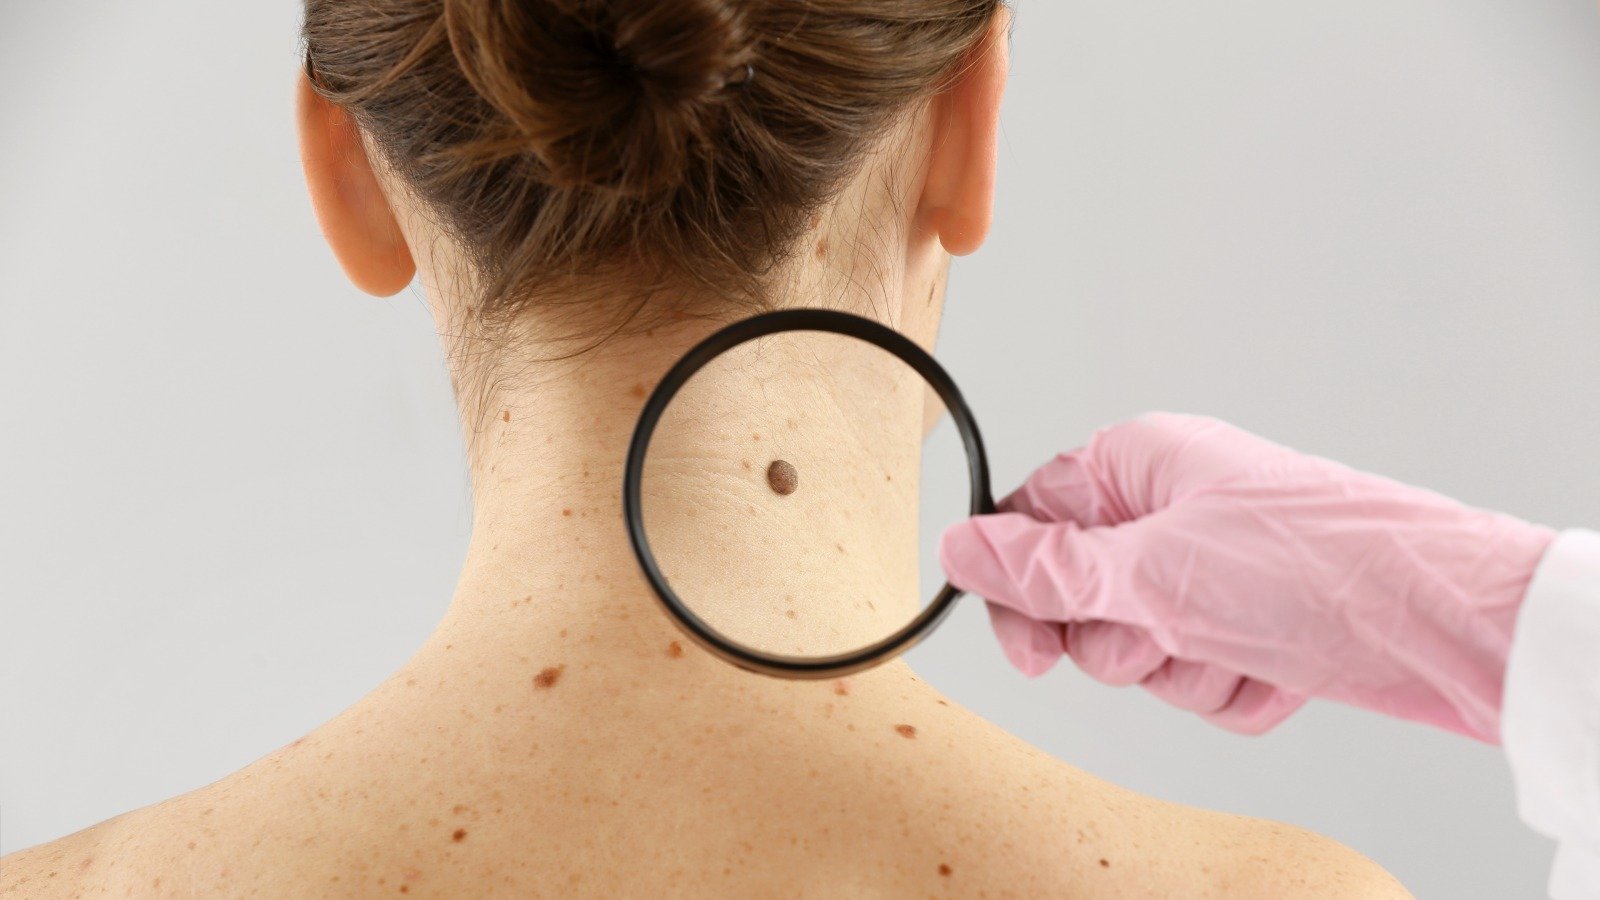 Doctor Explains When You Should Be Concerned About Your Mole